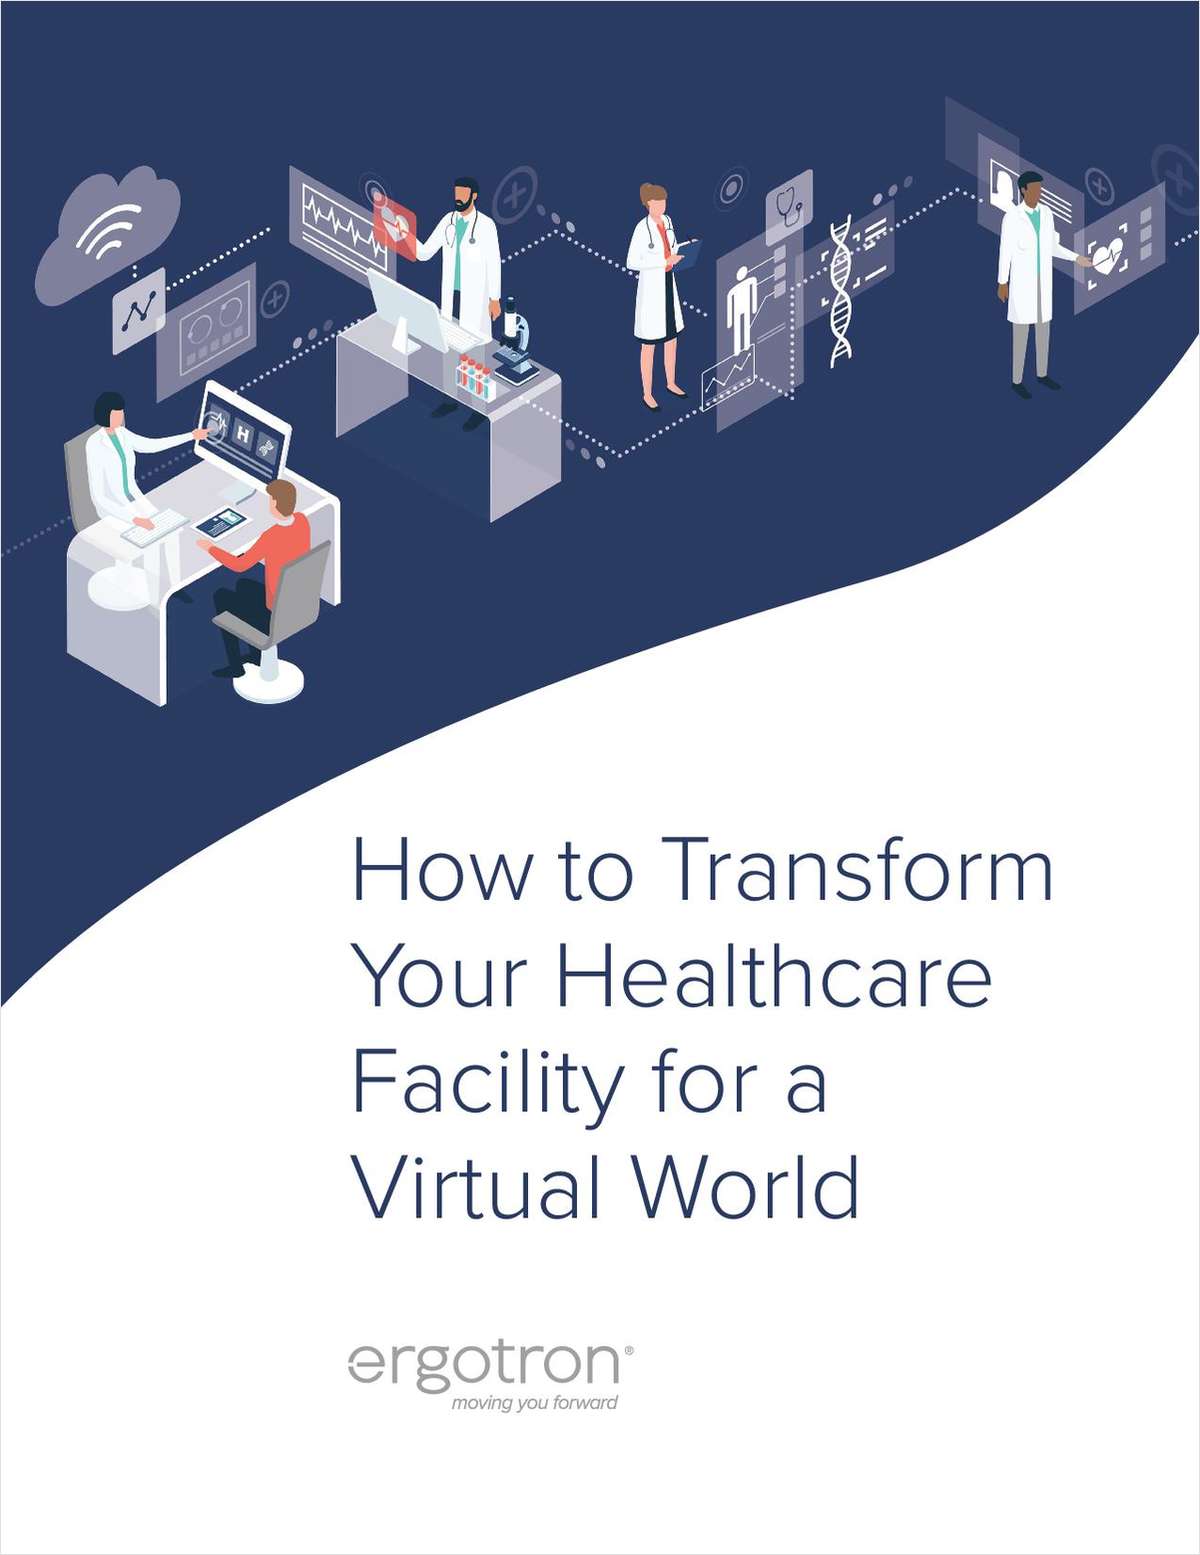 How to Transform Your Healthcare Facility for a Virtual World